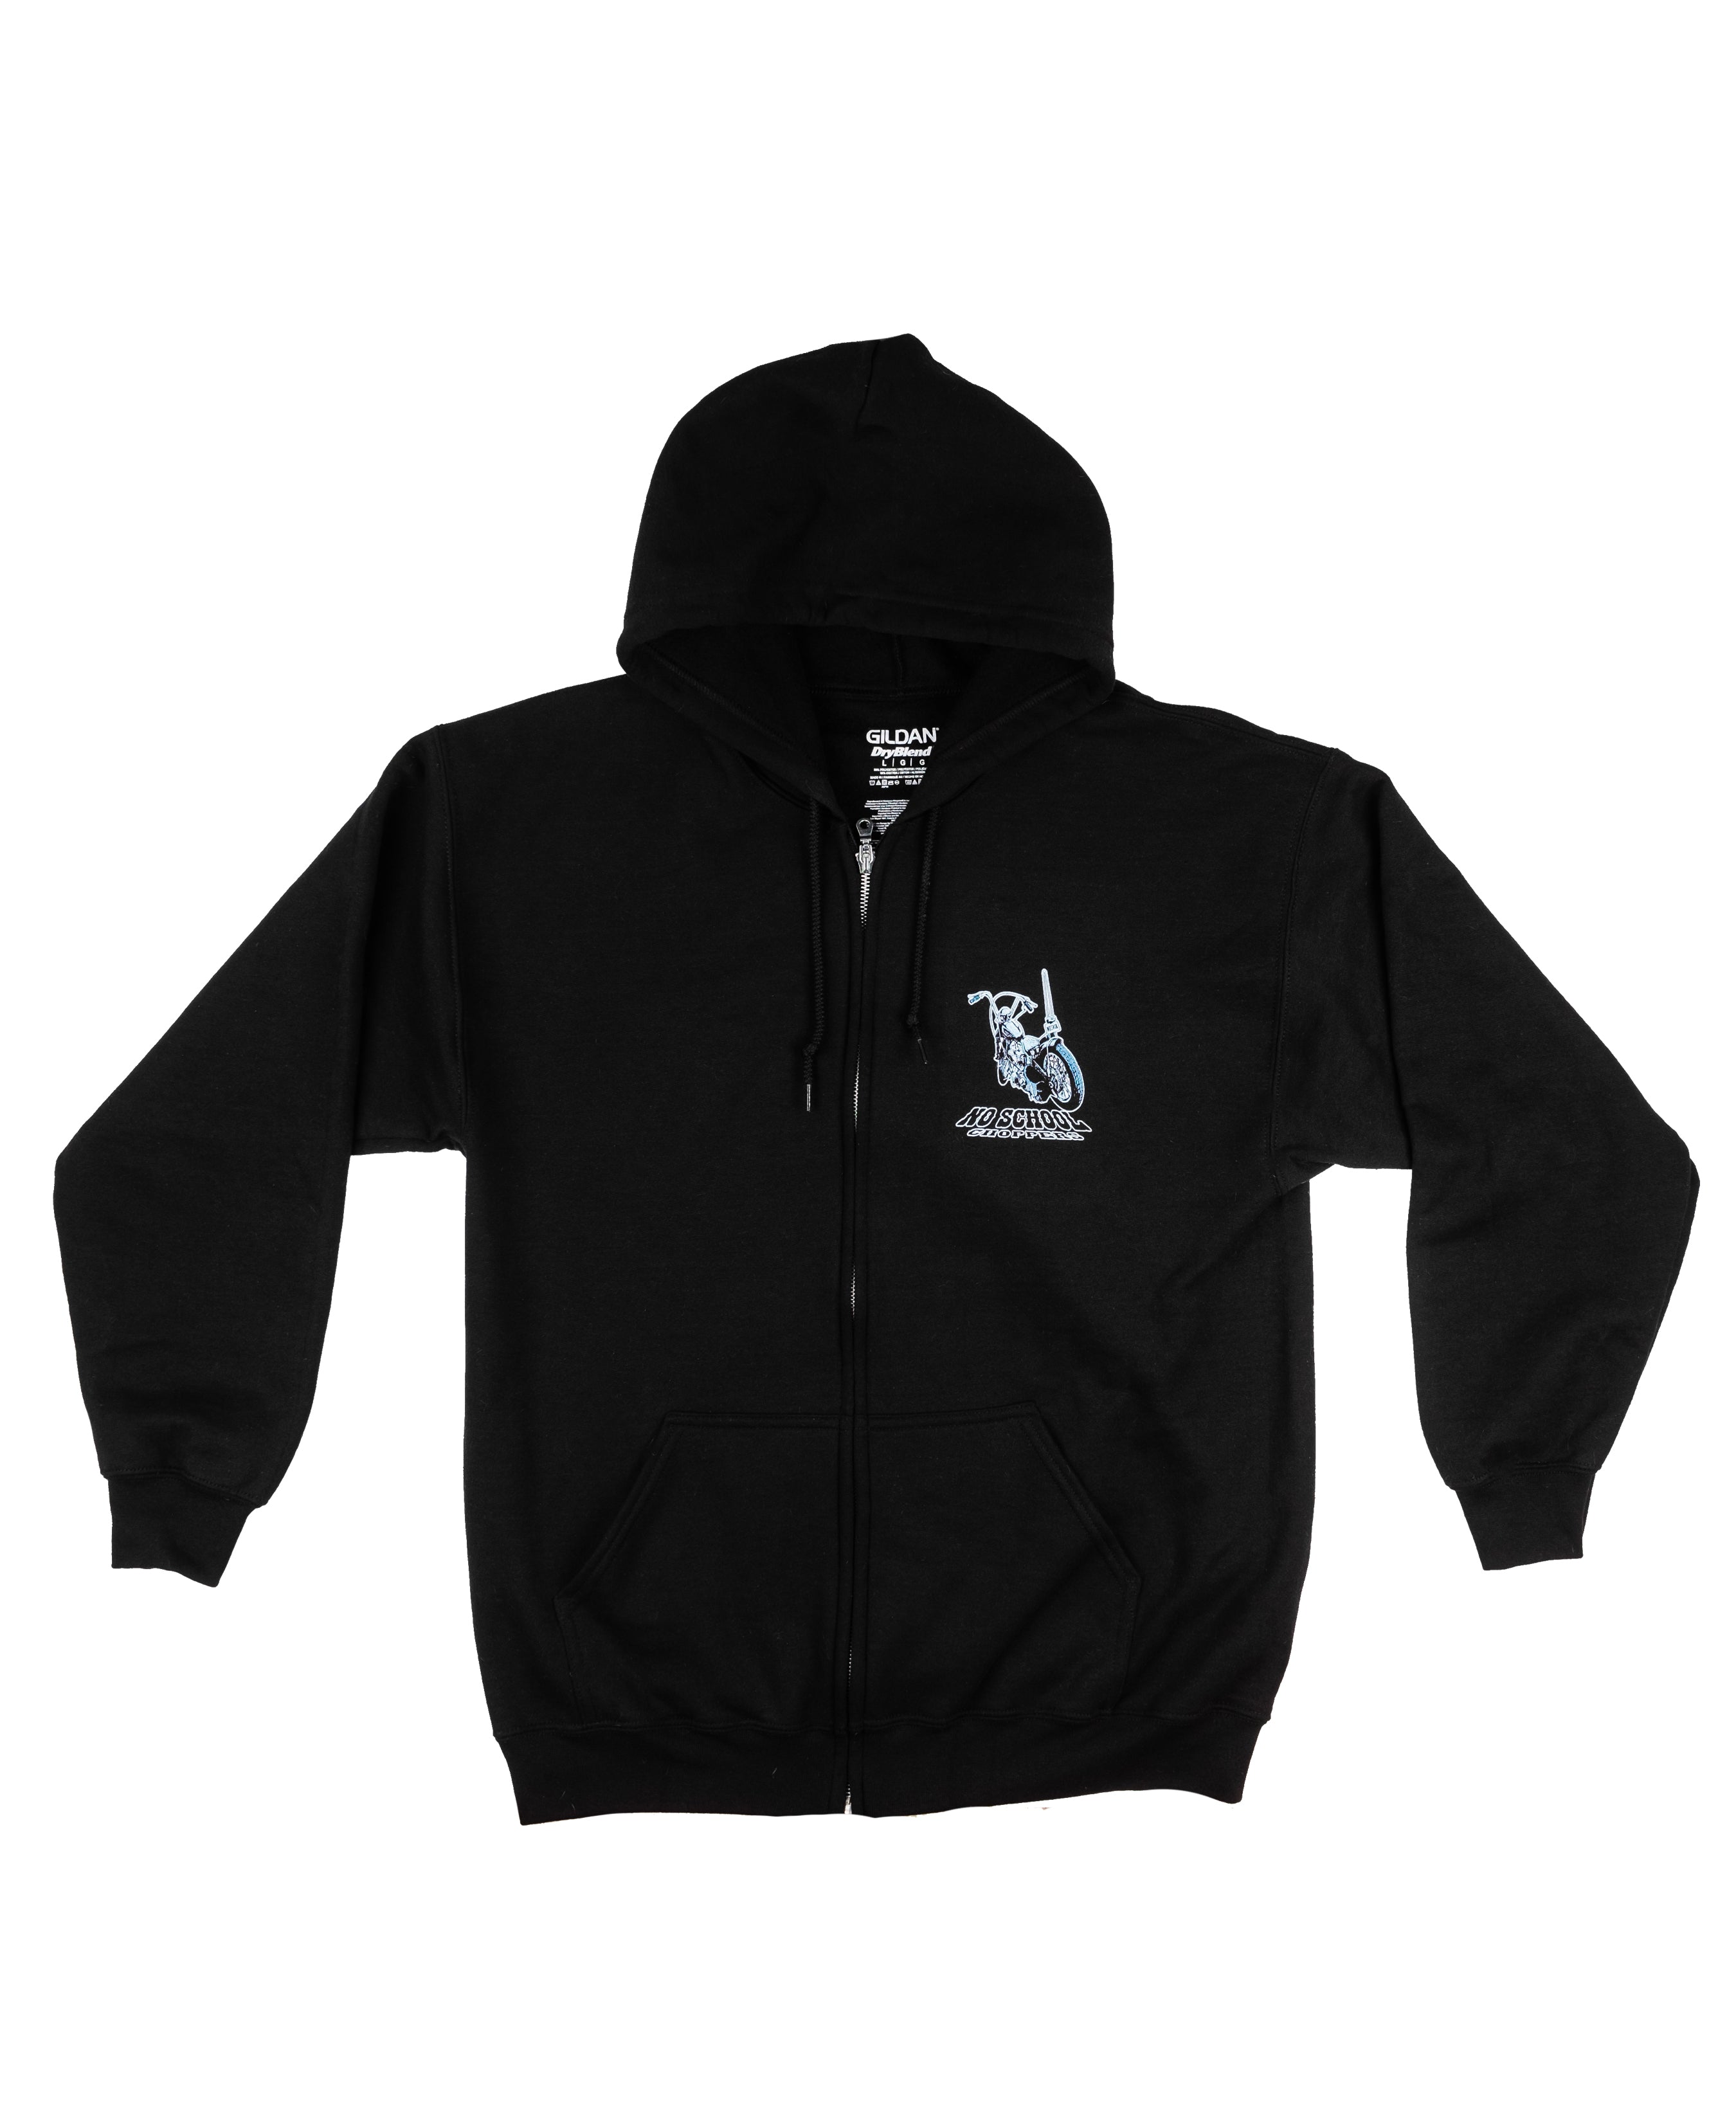 NEW! NSC Camp Out Zip Up Hooded Sweatshirt